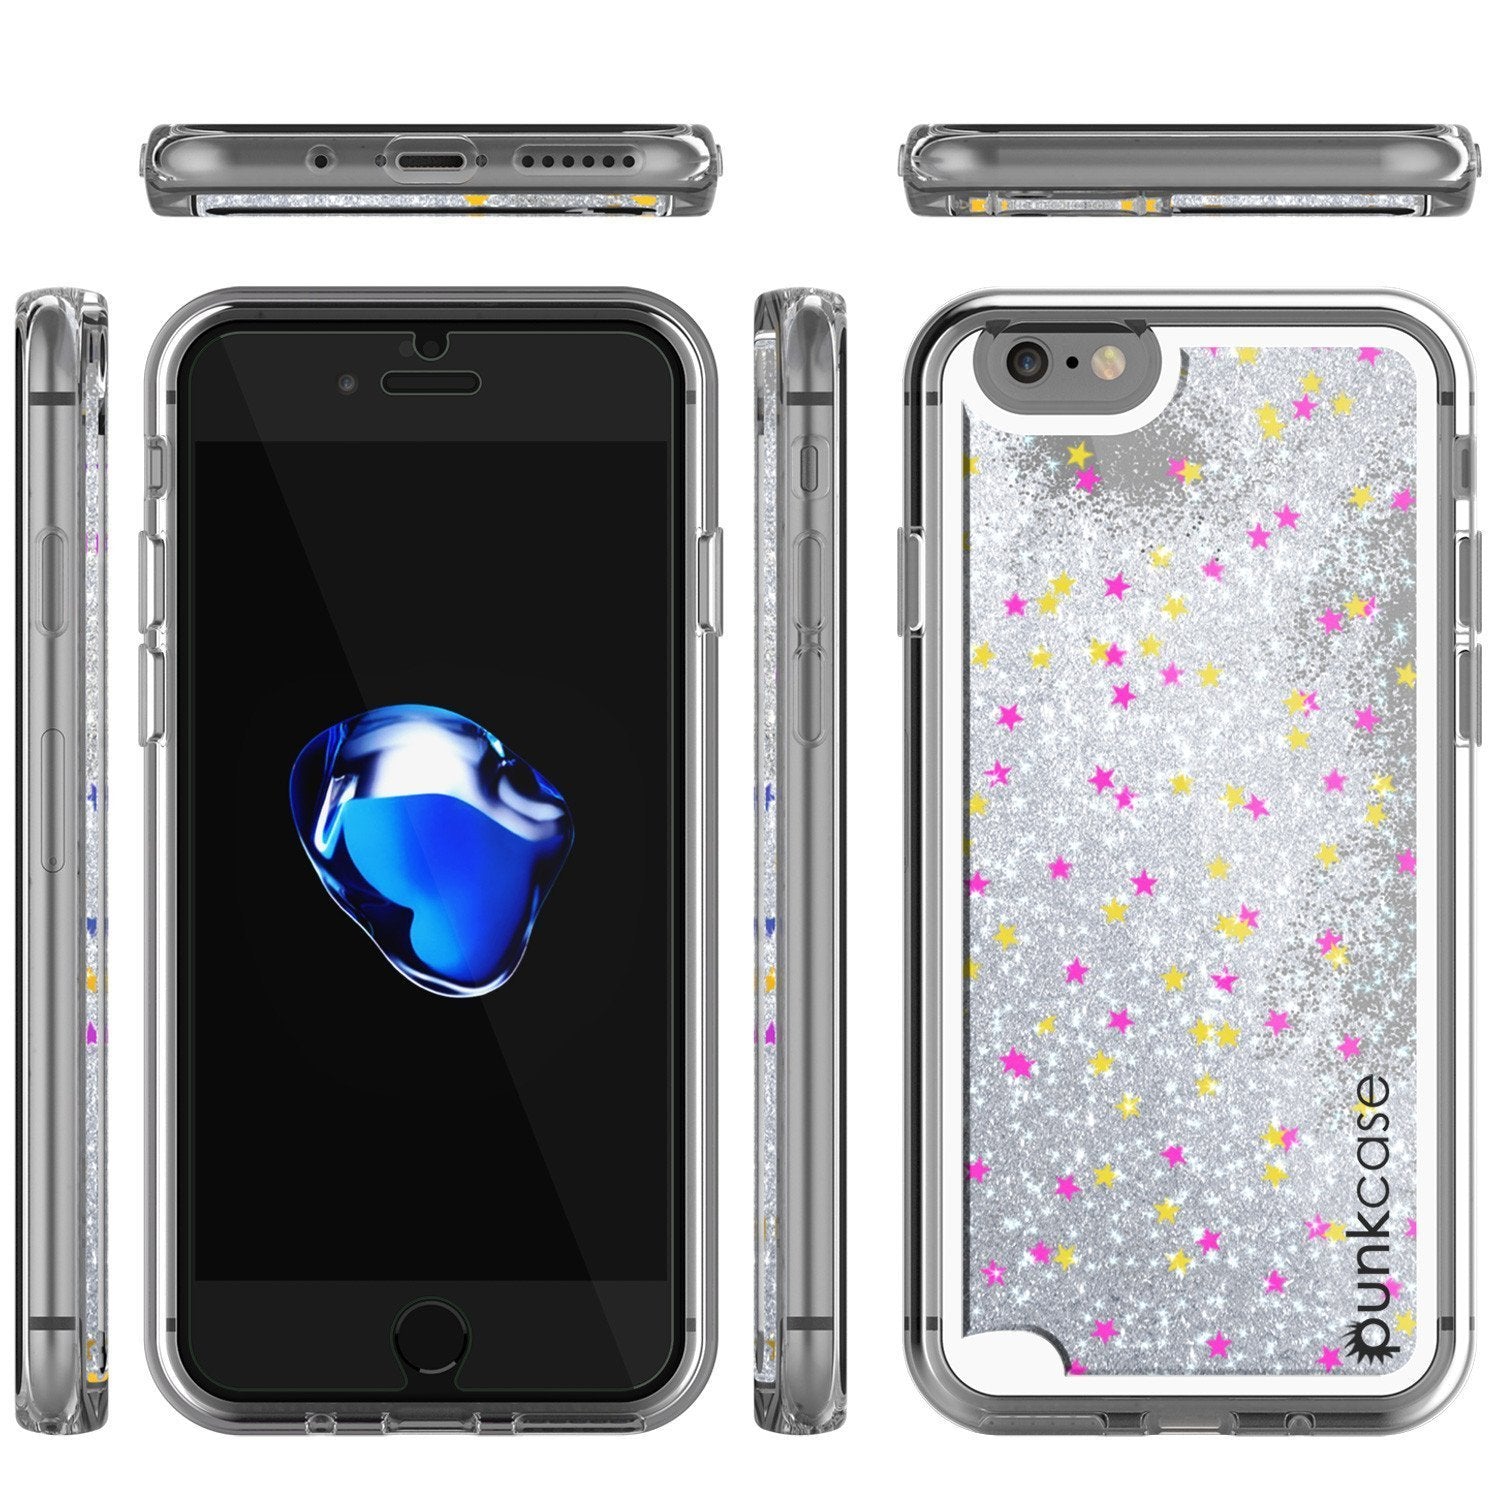 iPhone SE (4.7") Case, PunkCase LIQUID Silver Series, Protective Dual Layer Floating Glitter Cover